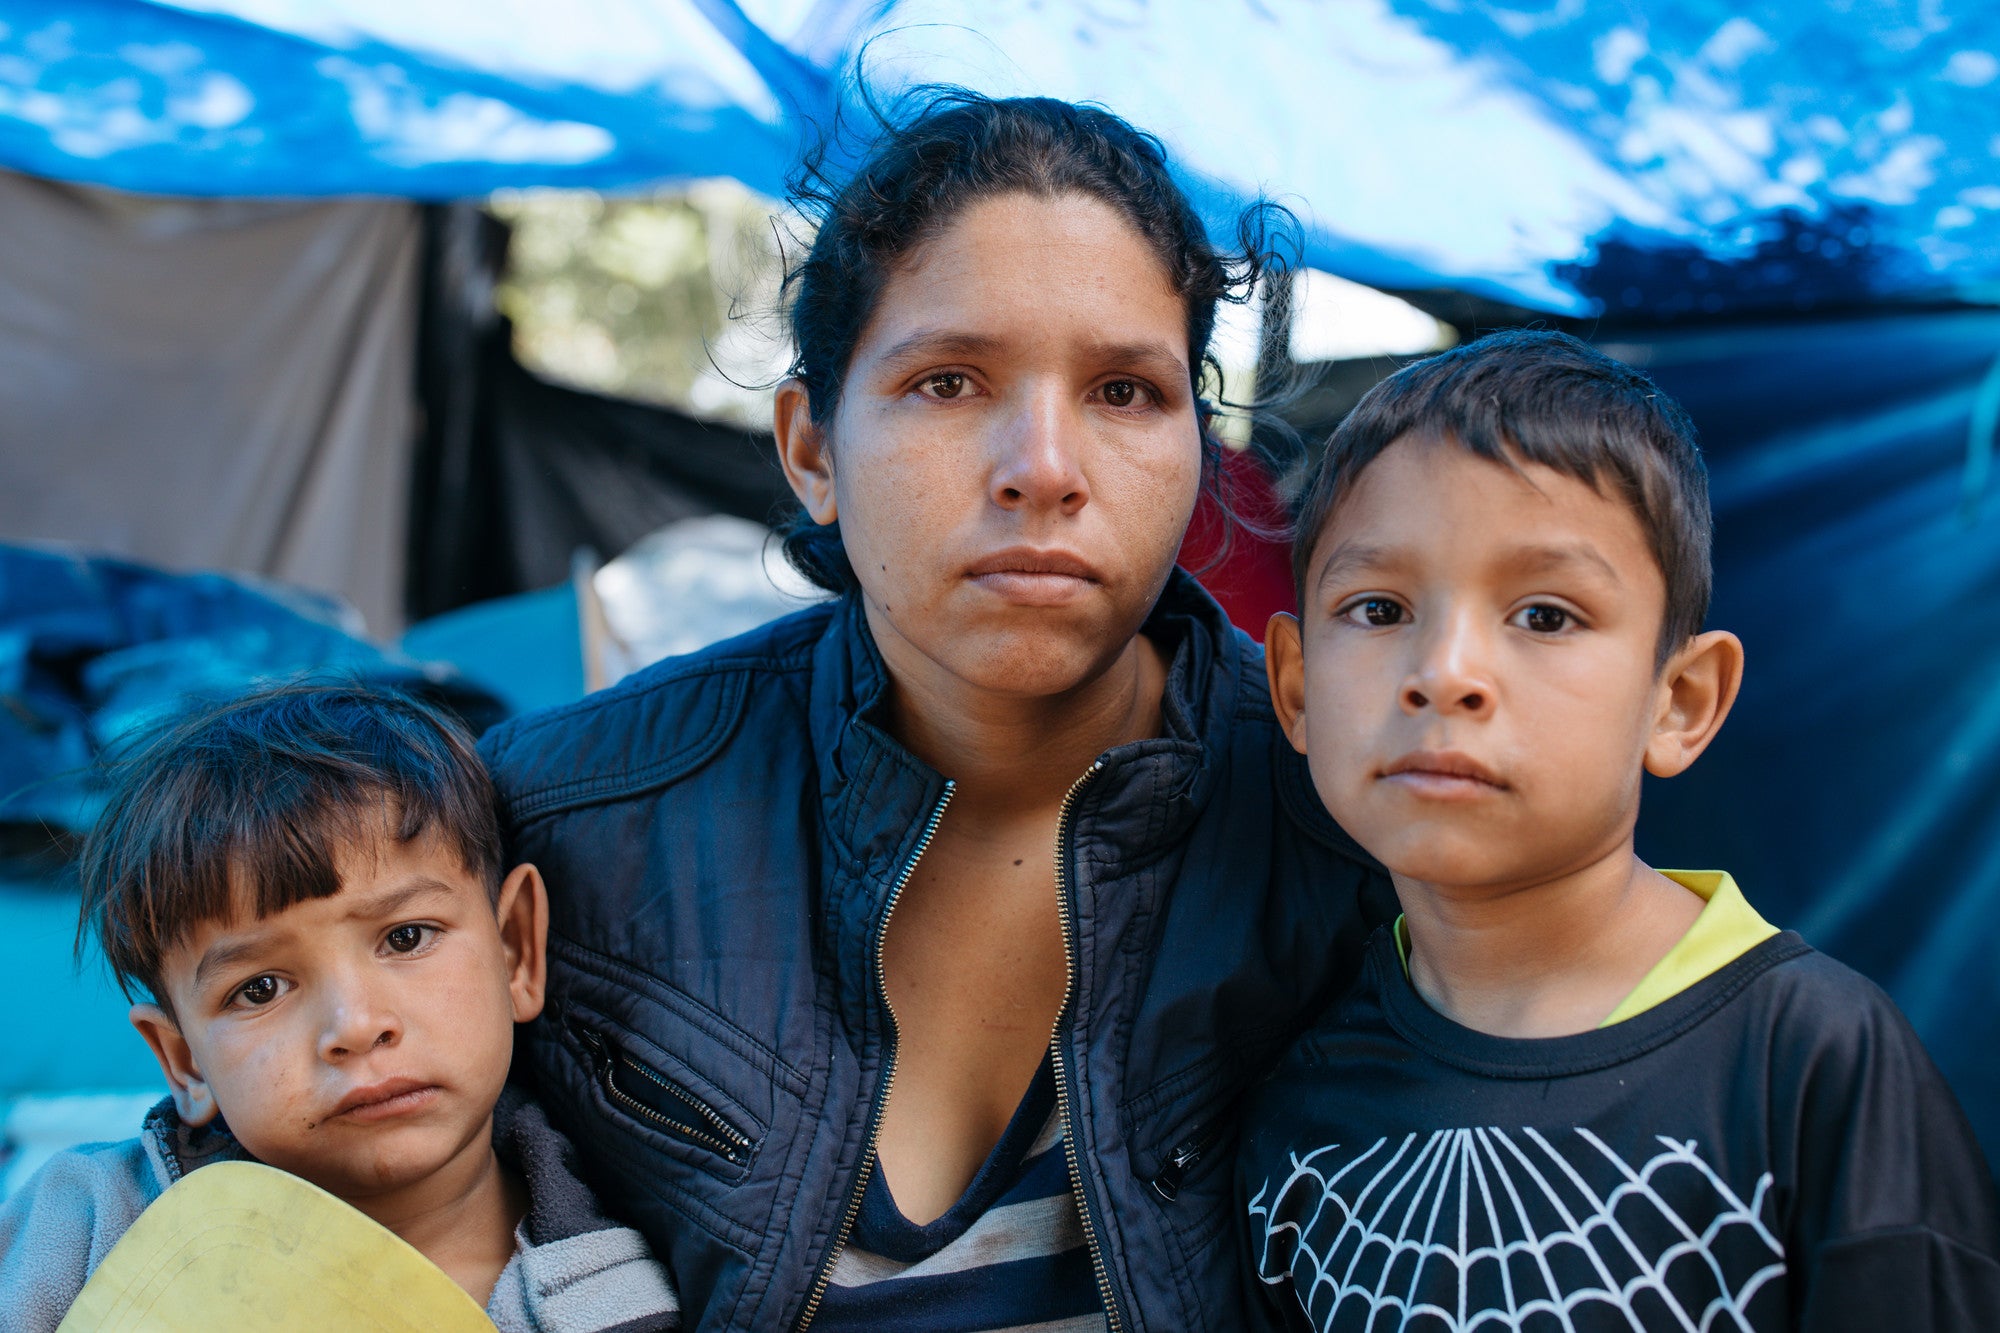 Nazereth Piloira 27, waits near Carcelen Bus Terminal in Quito near the informal tented settlement with her children waiting for public food donations